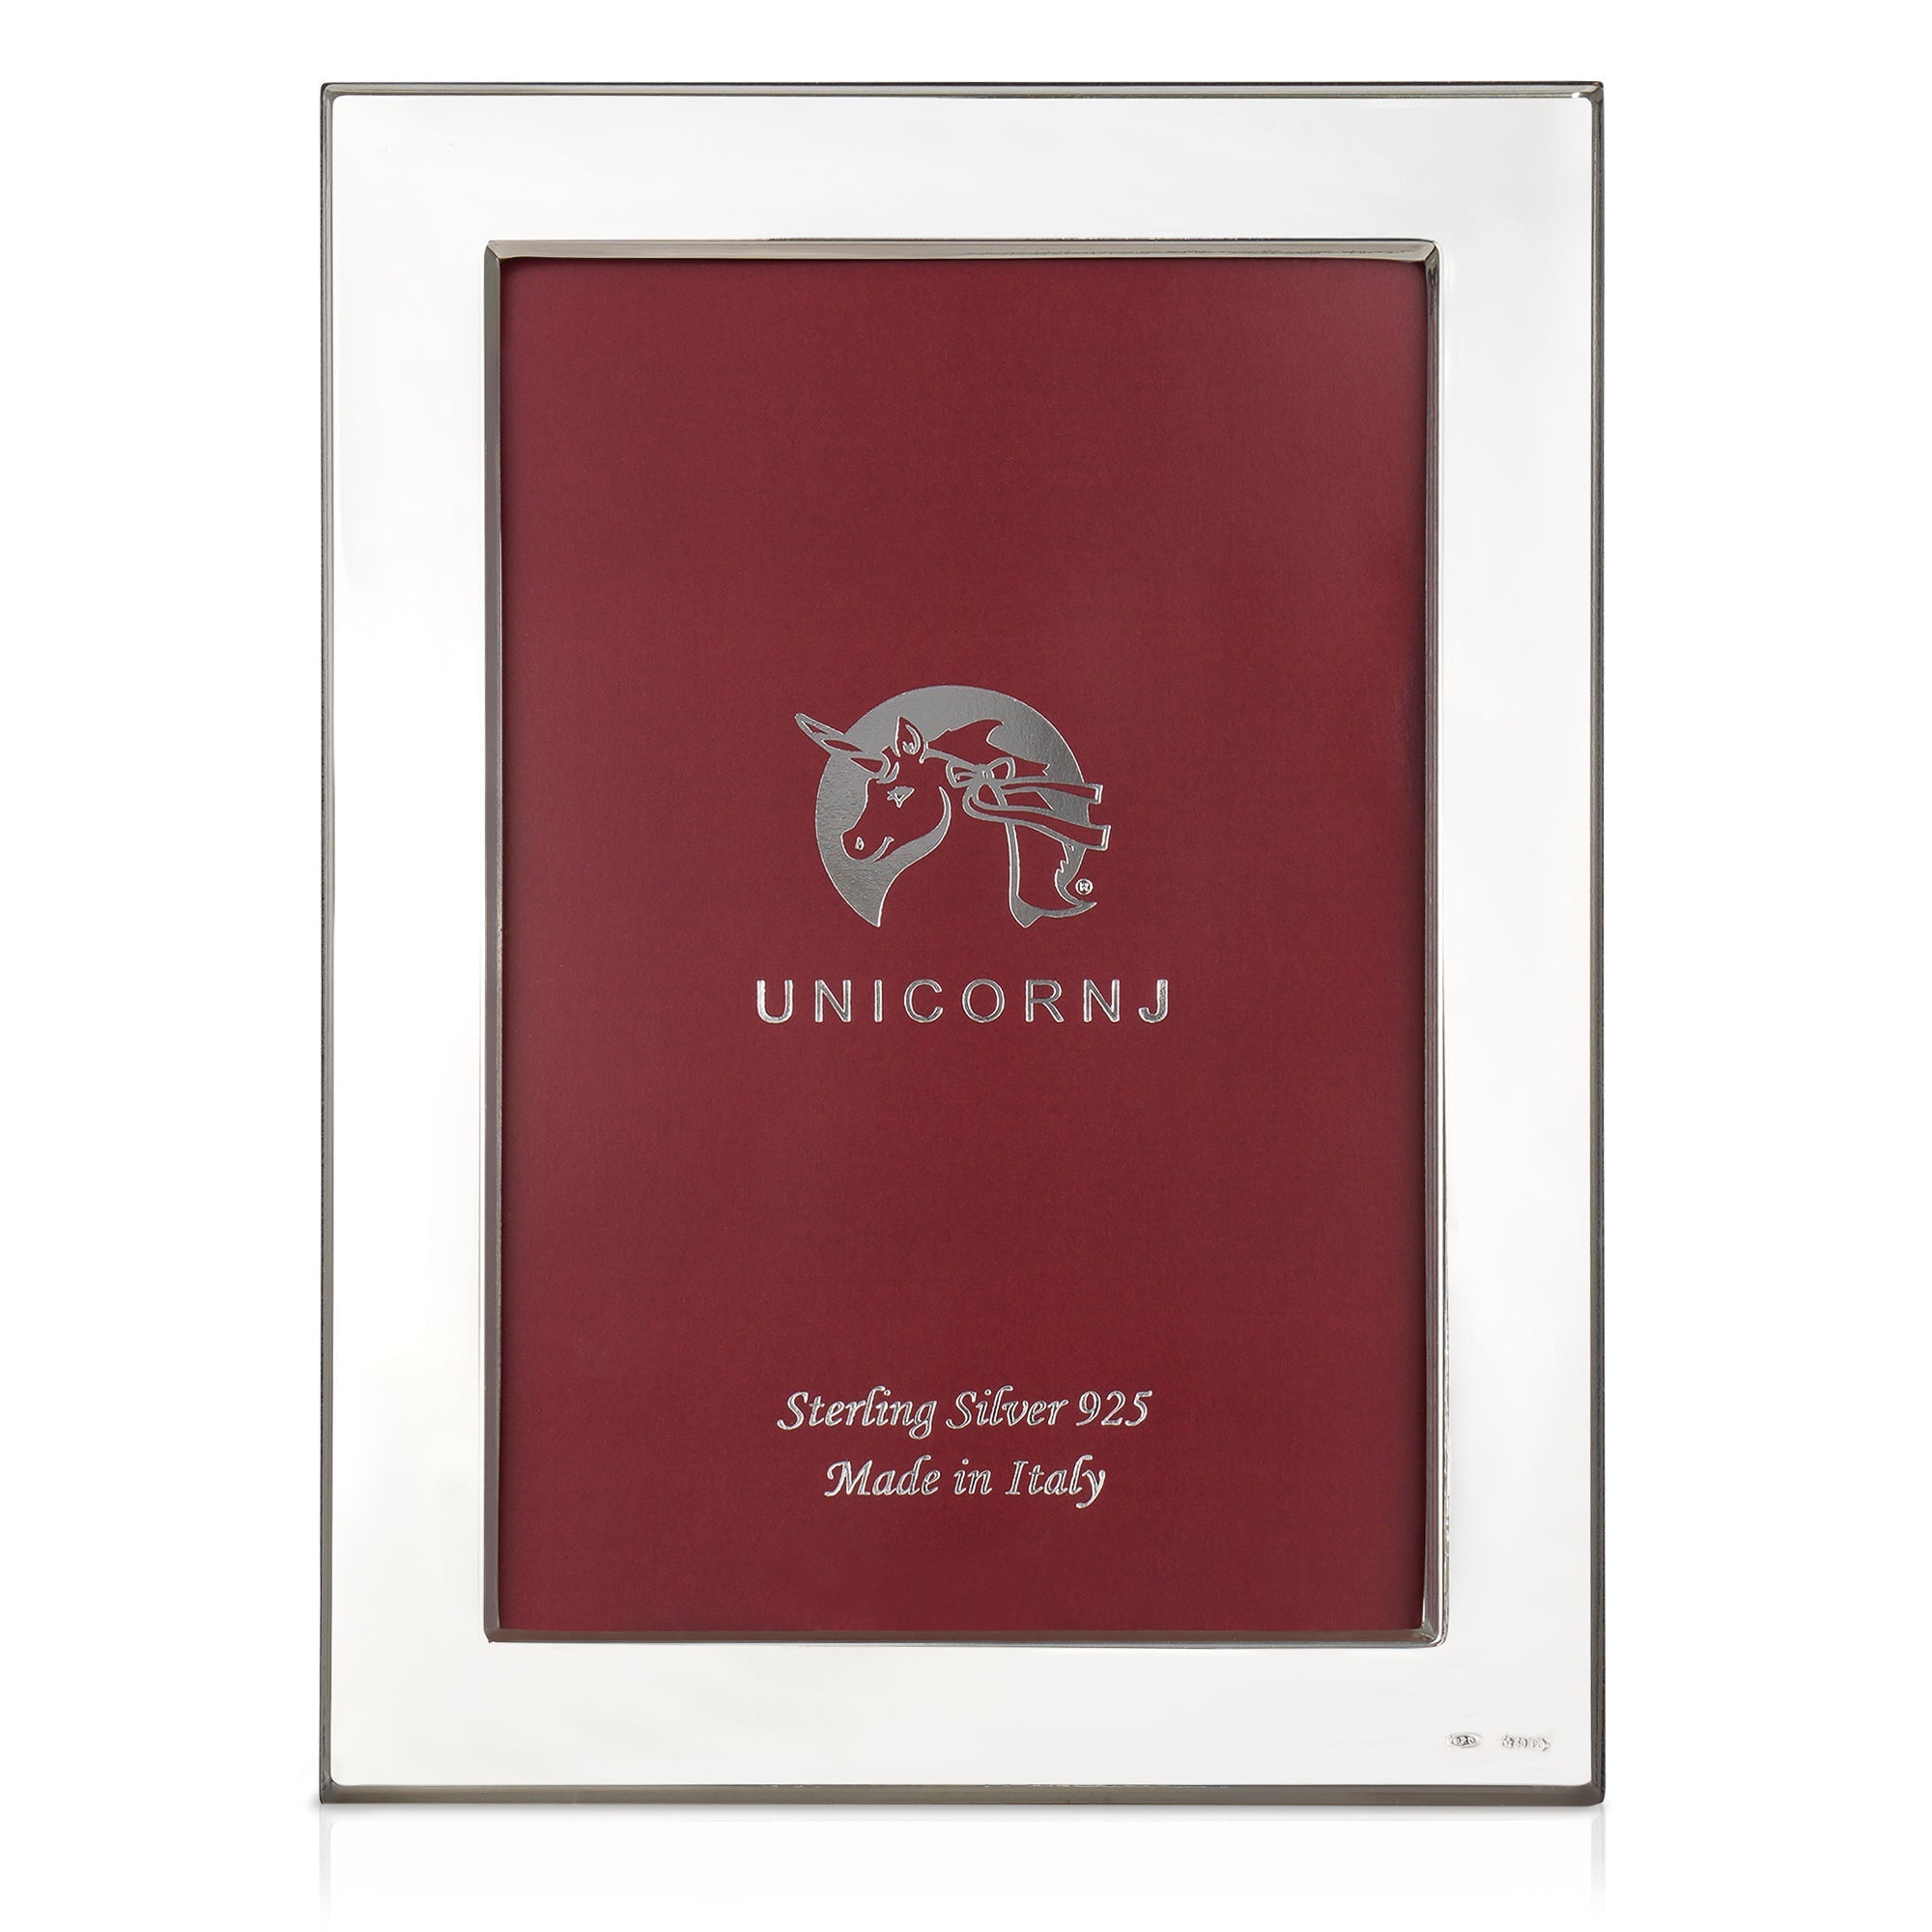 UNICORNJ Sterling Silver 4x6 Picture Frame Plain Polished 3/4" Inch Border Made In Italy